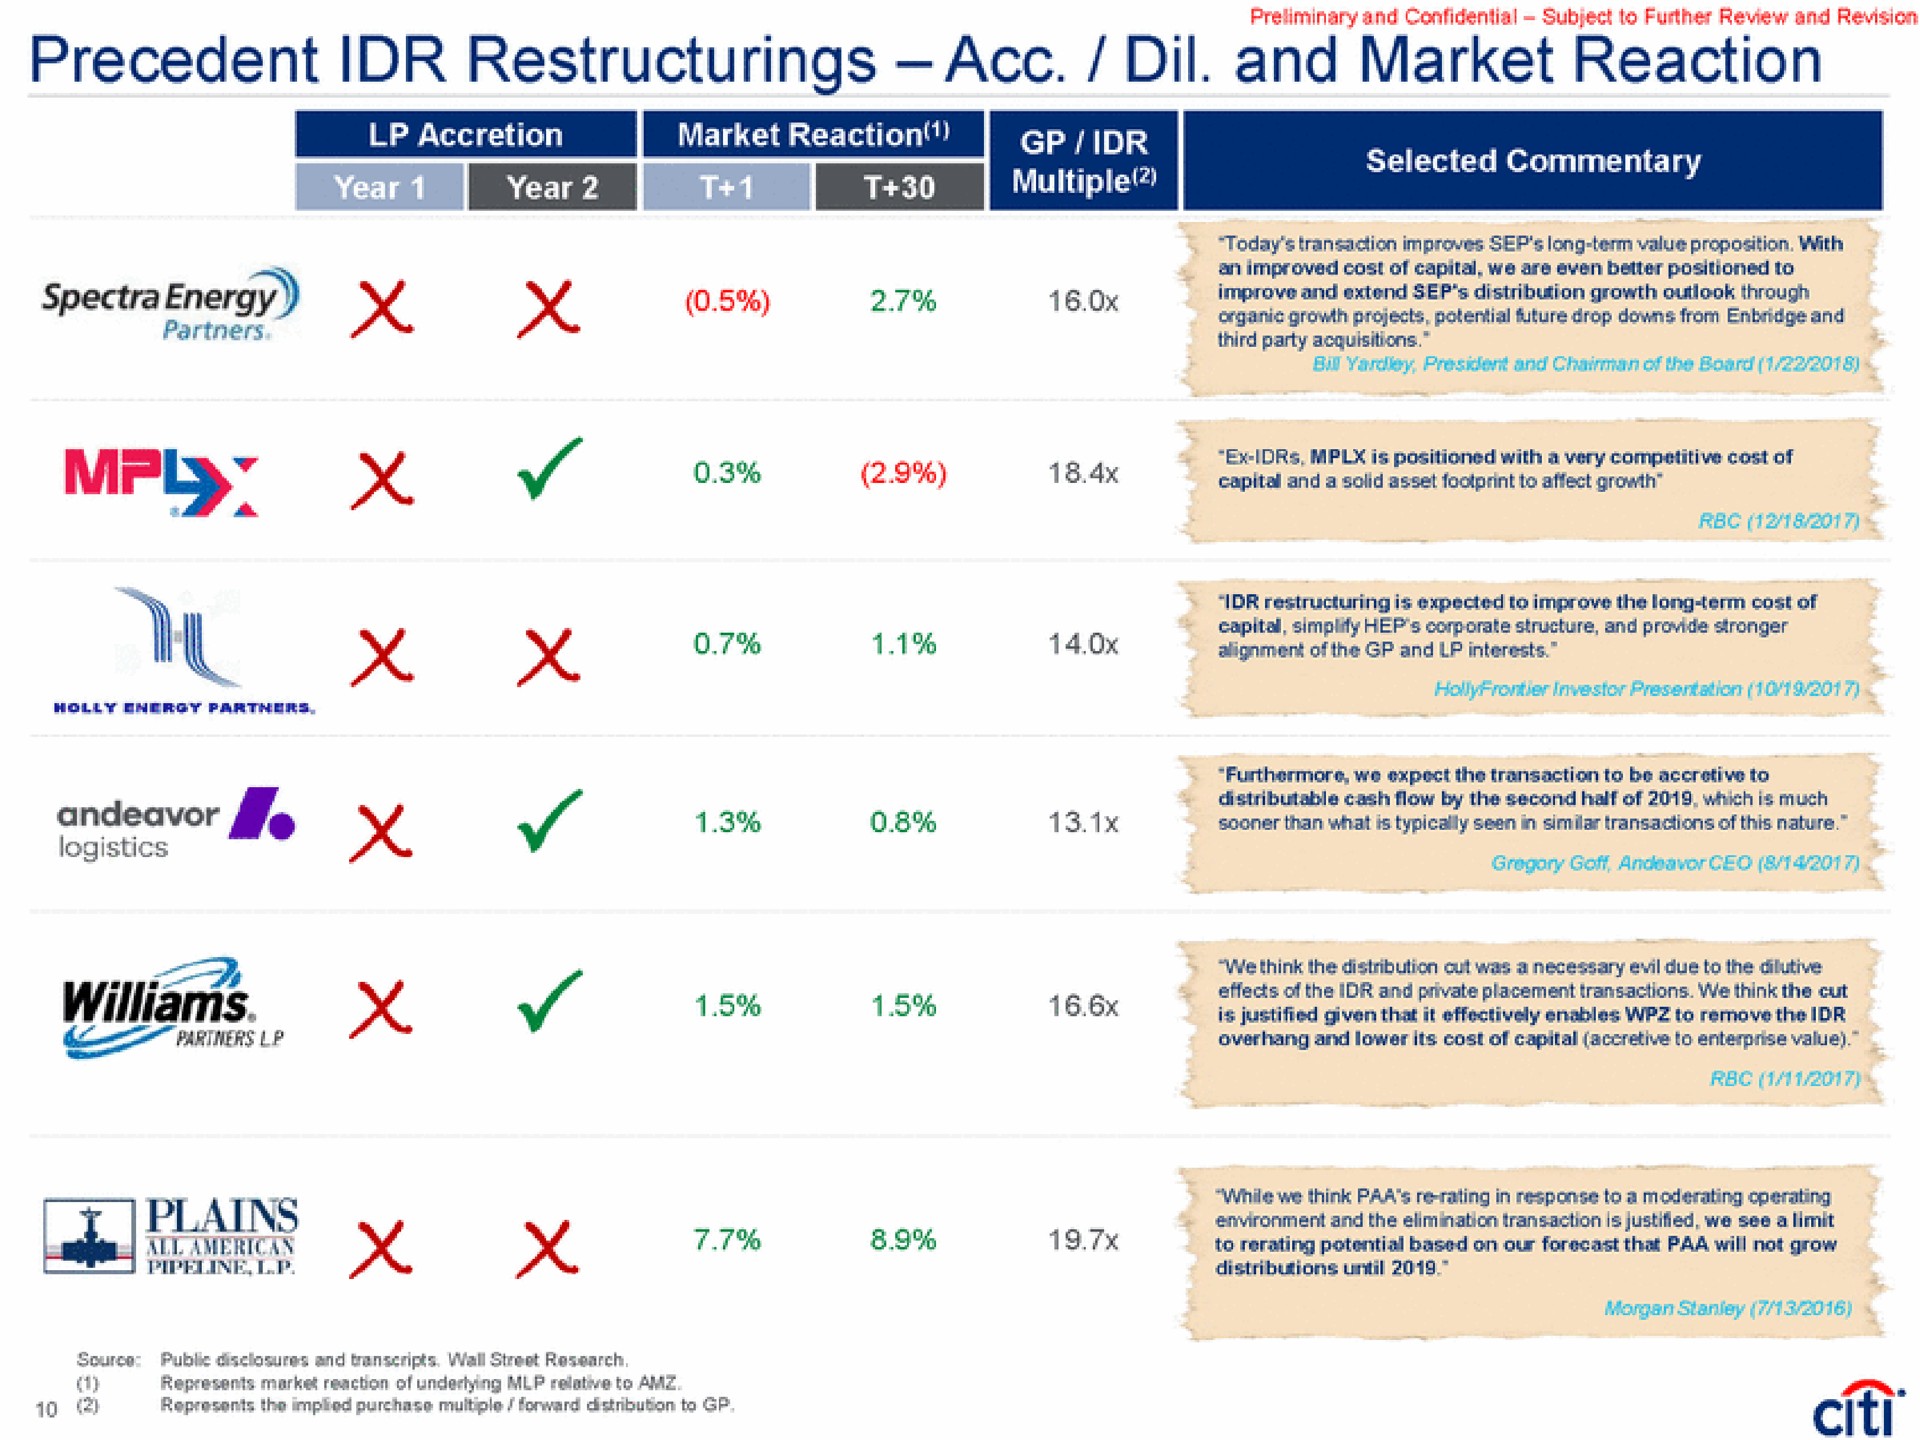 precedent and market reaction ere tai mel a a is justified given that it effectively enables to remove the | Citi